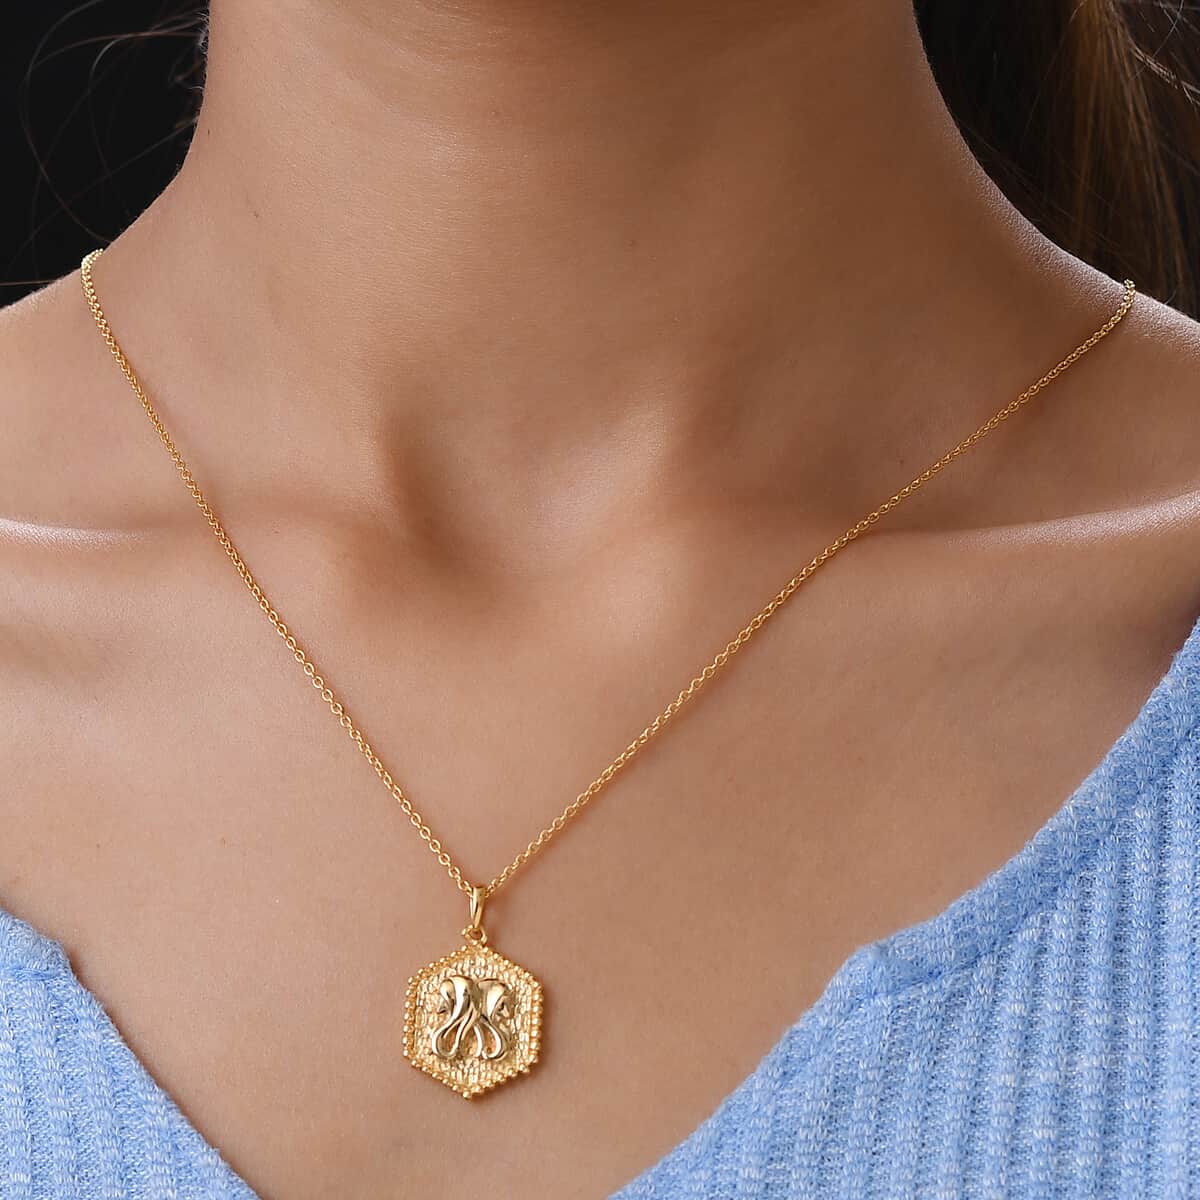 Karis Gemini Zodiac Pendant Necklace 20 Inches in 18K YG Plated and ION Plated Yellow Gold Stainless Steel image number 2